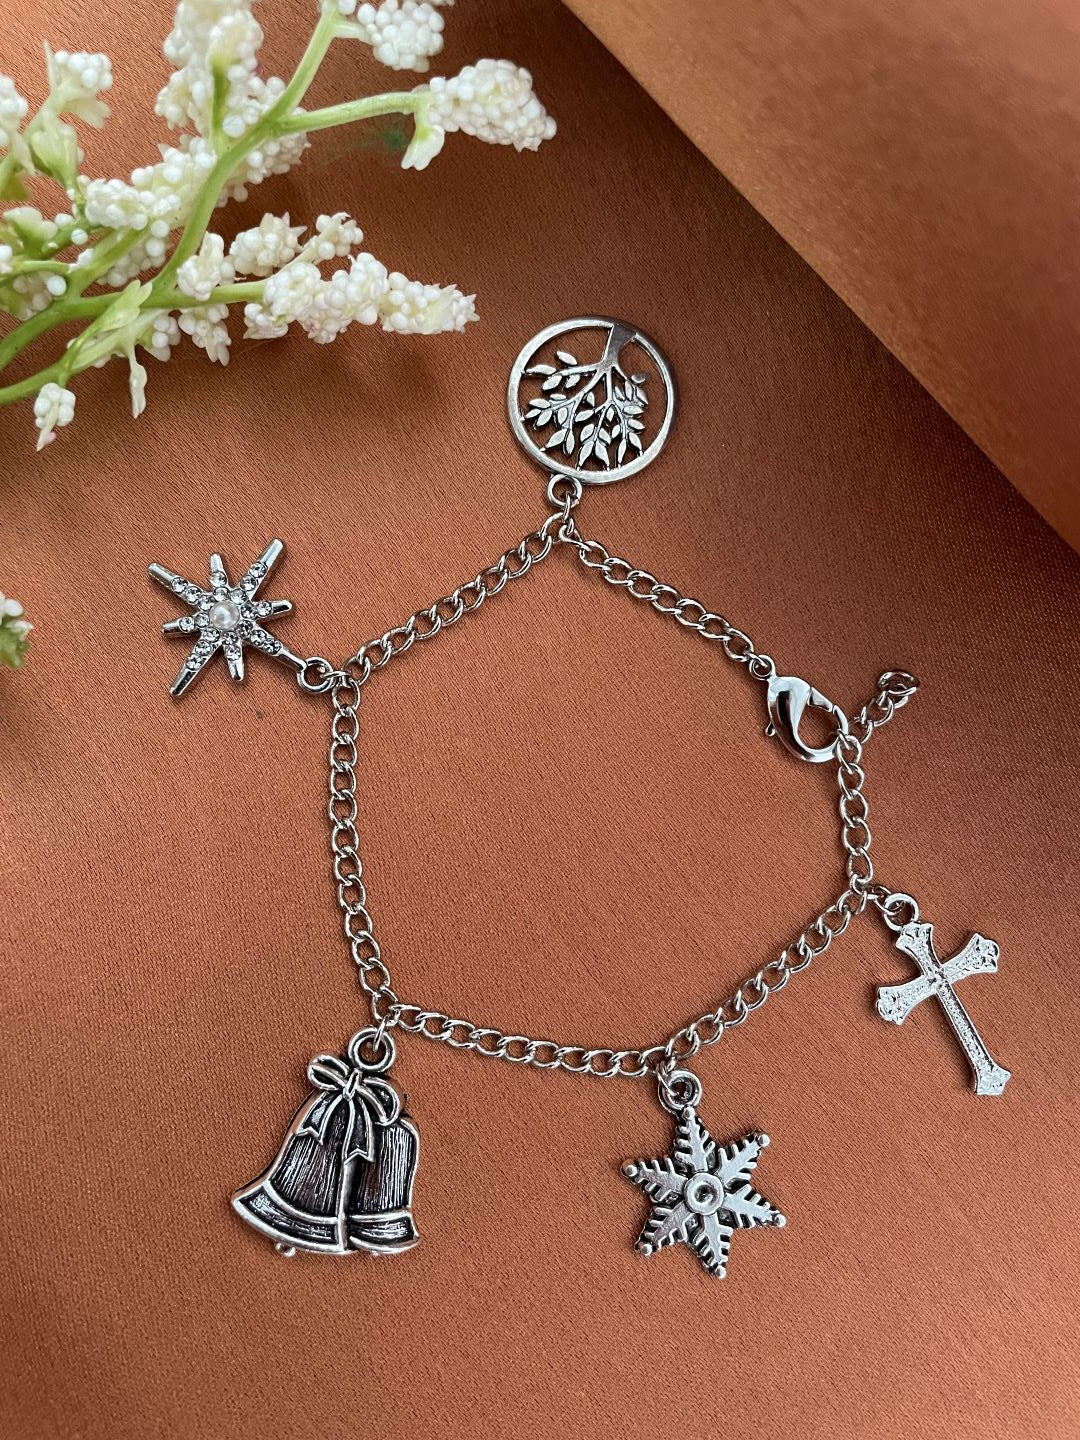 Christmas Silver Bracelet with Charms